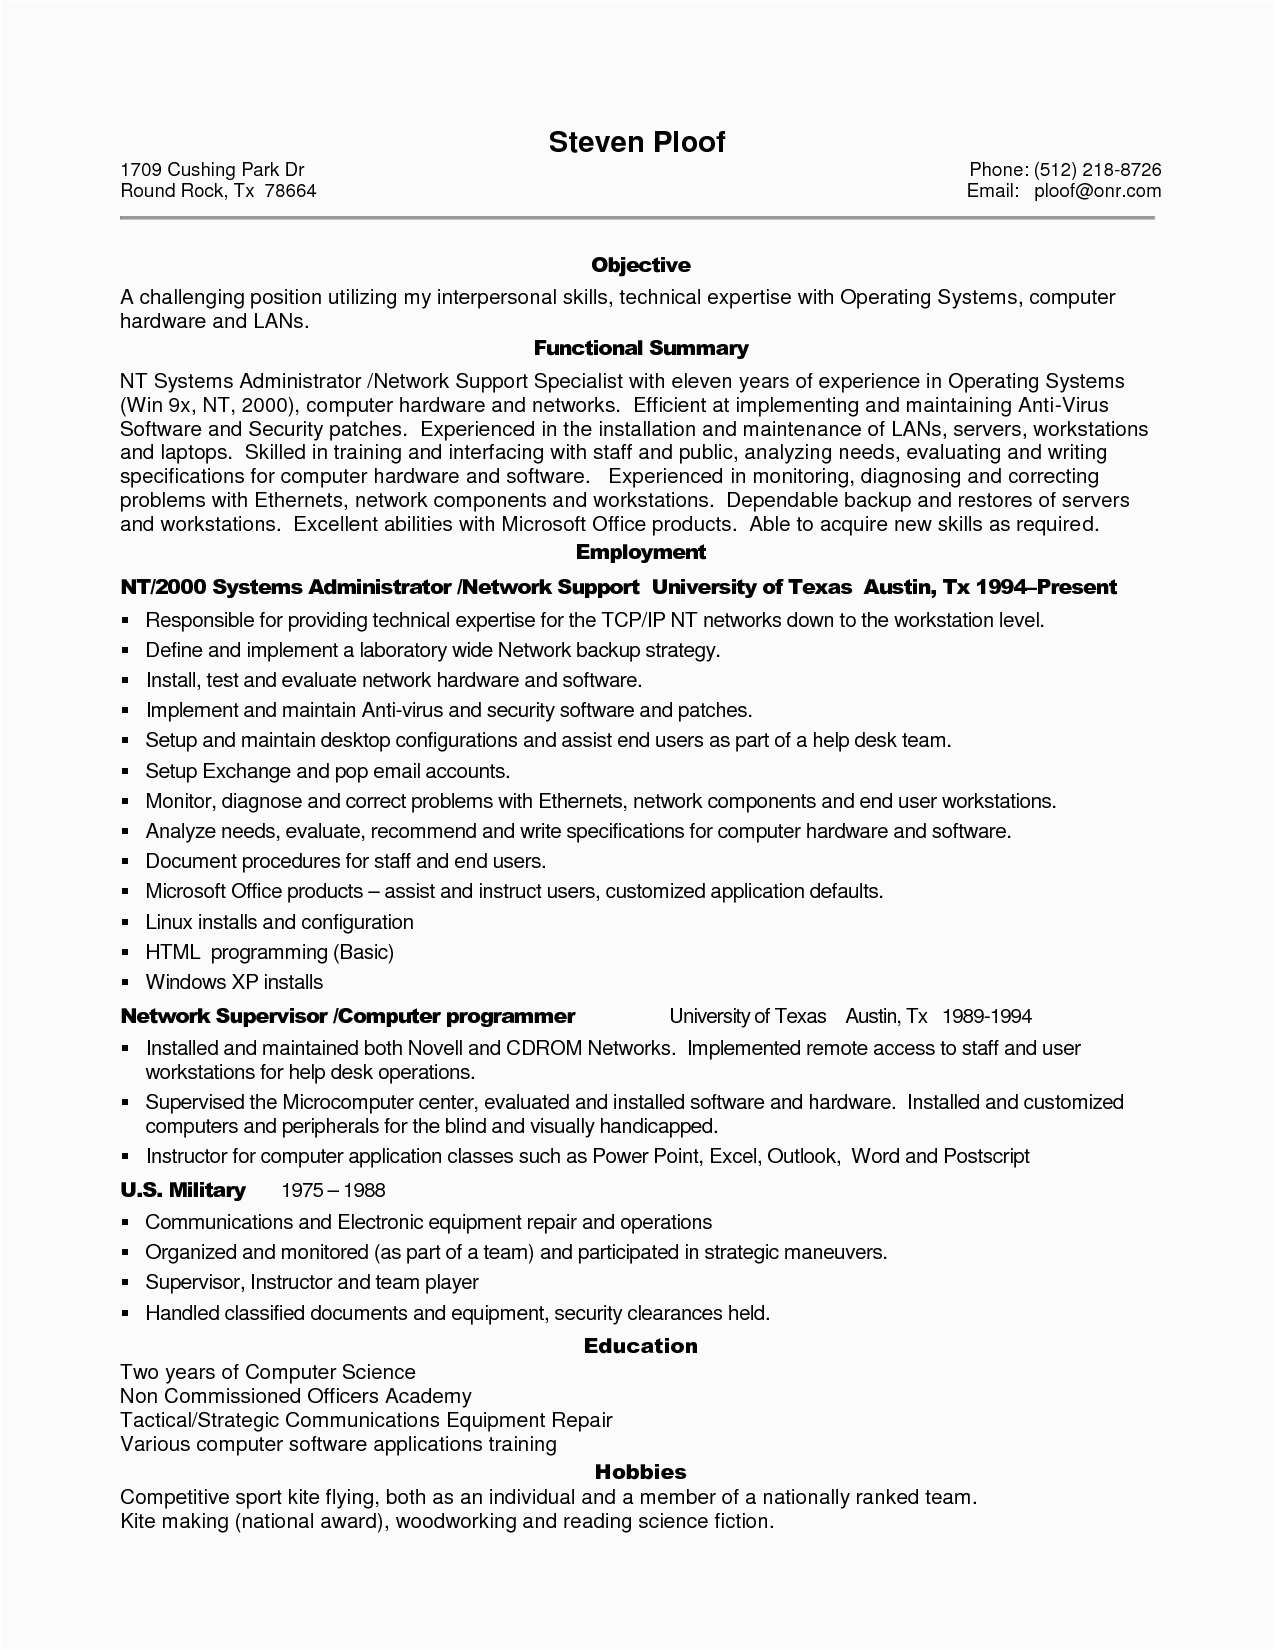 Year 10 Work Experience Resume Sample Resume format 10 Years Experience Resume Templates